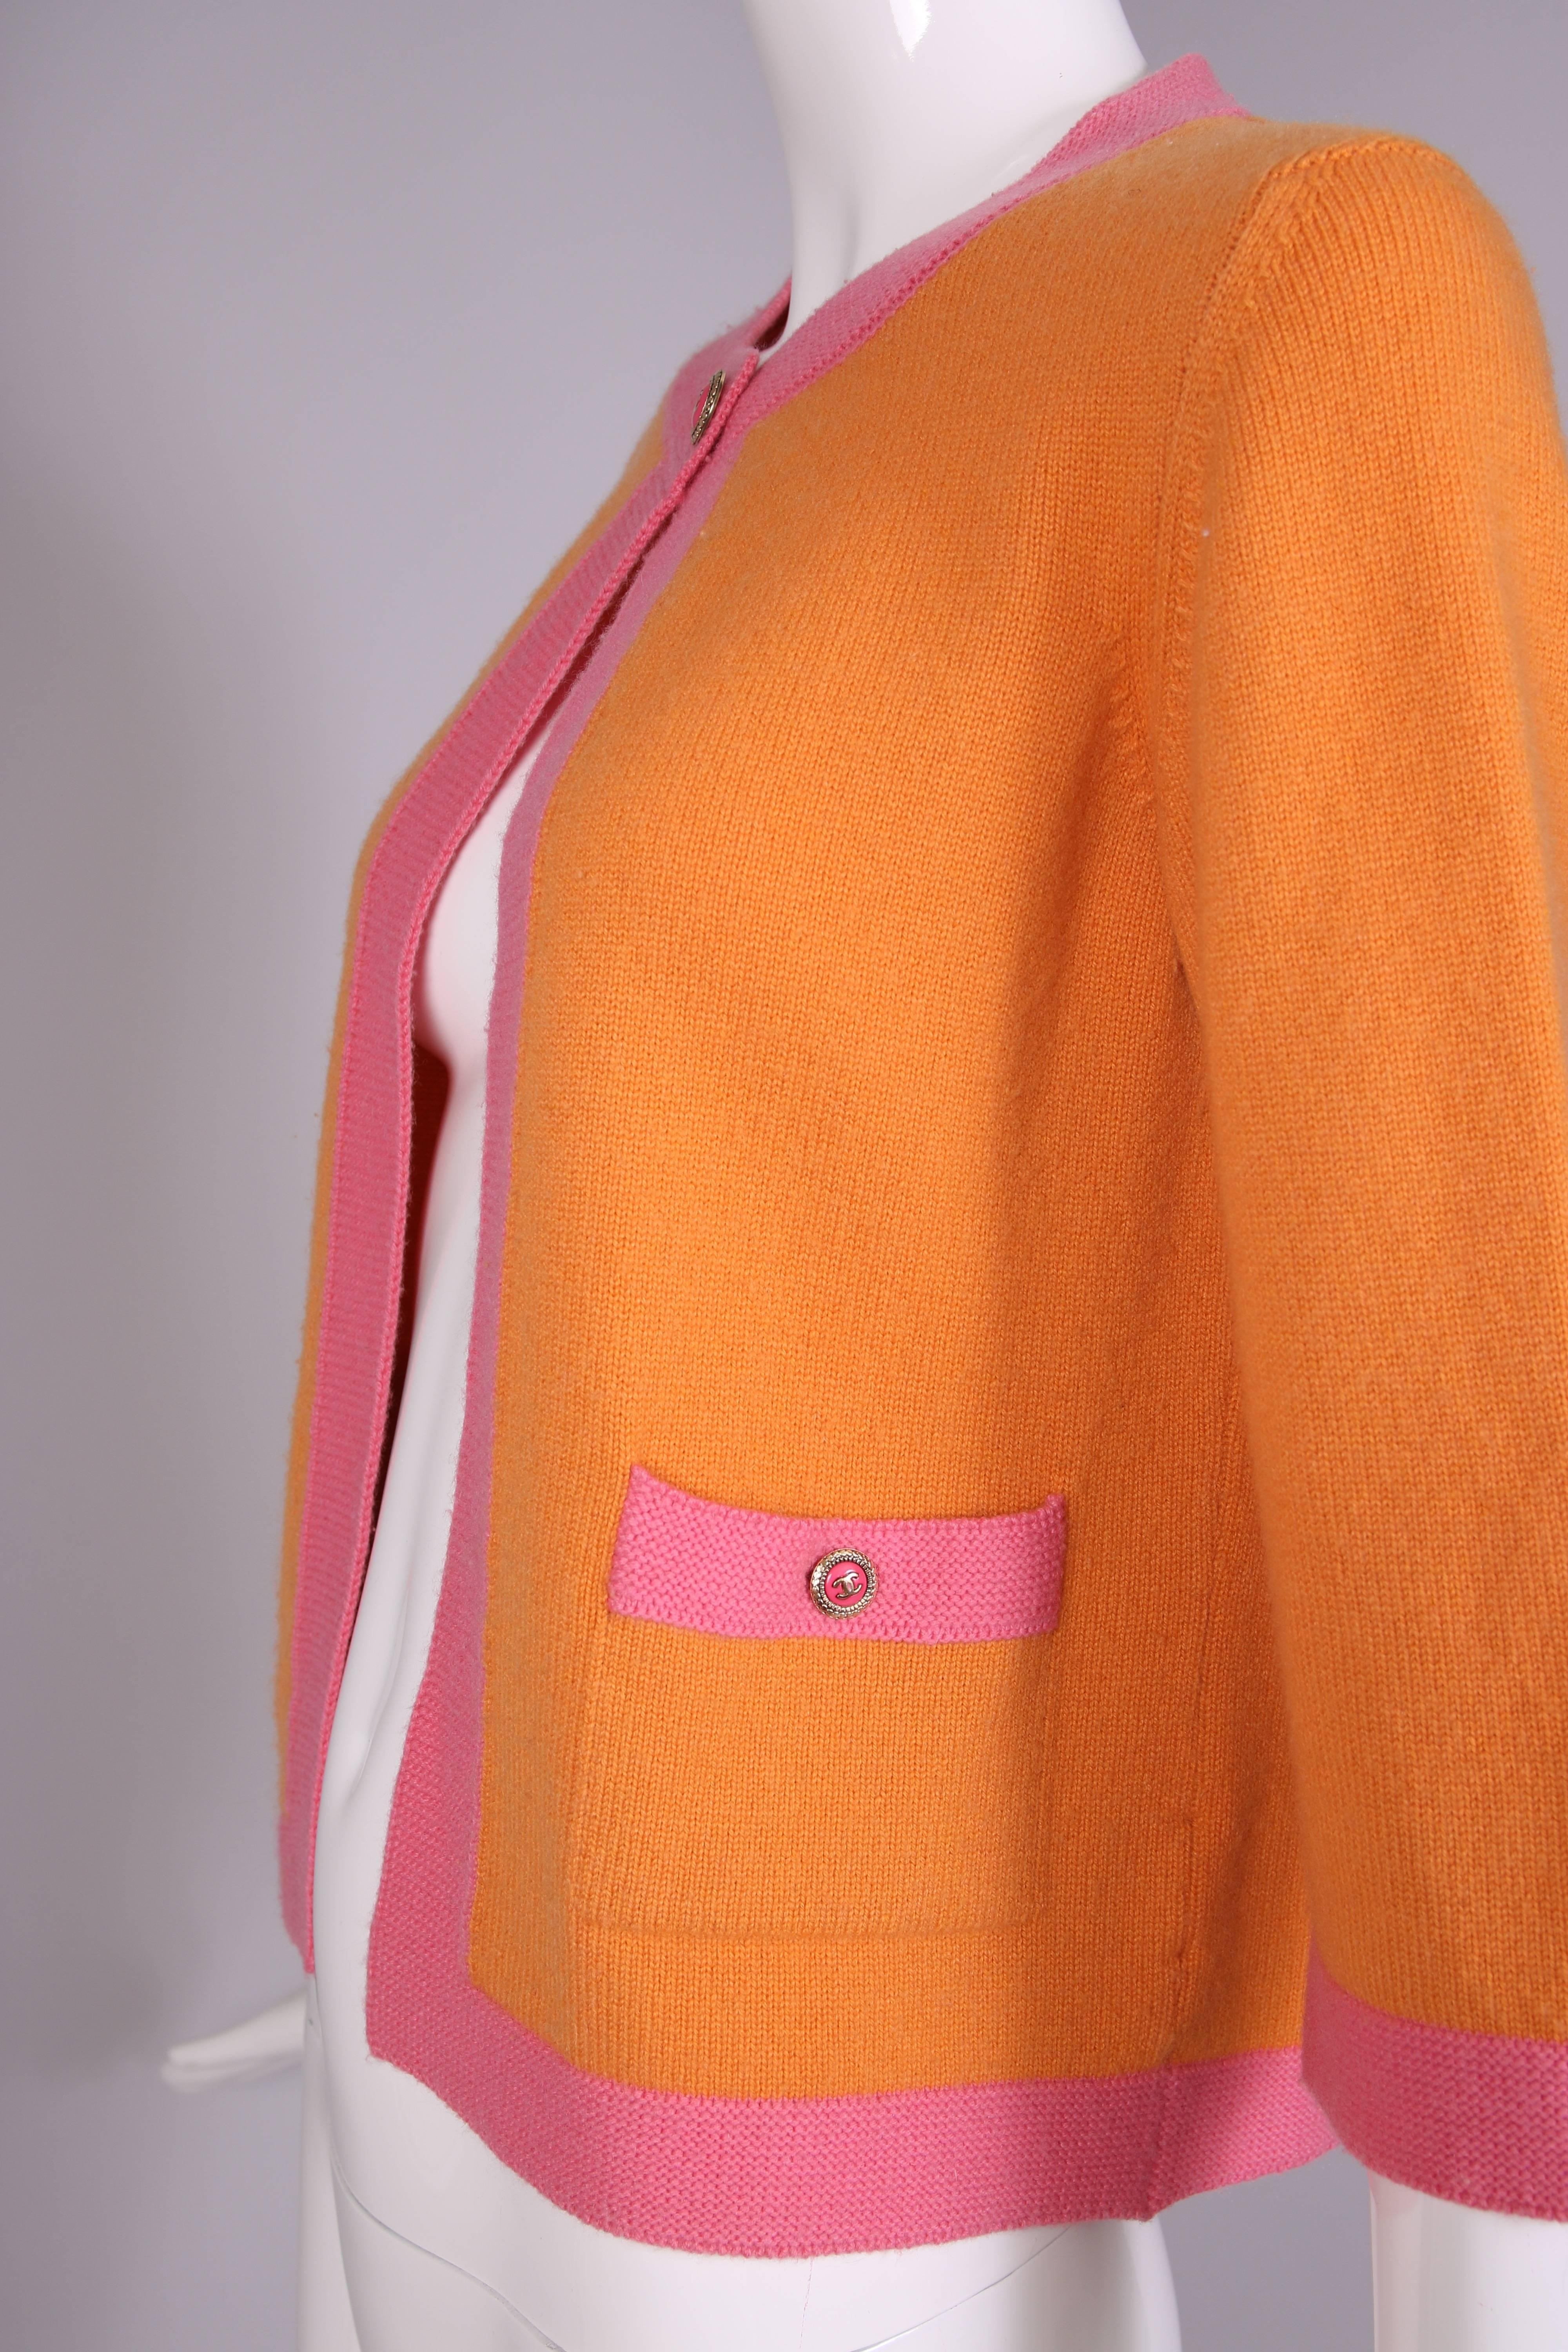 2007 Chanel Orange Cashmere Cardigan W/Chanel CC Logo Buttons & Pink Trim In Excellent Condition In Studio City, CA